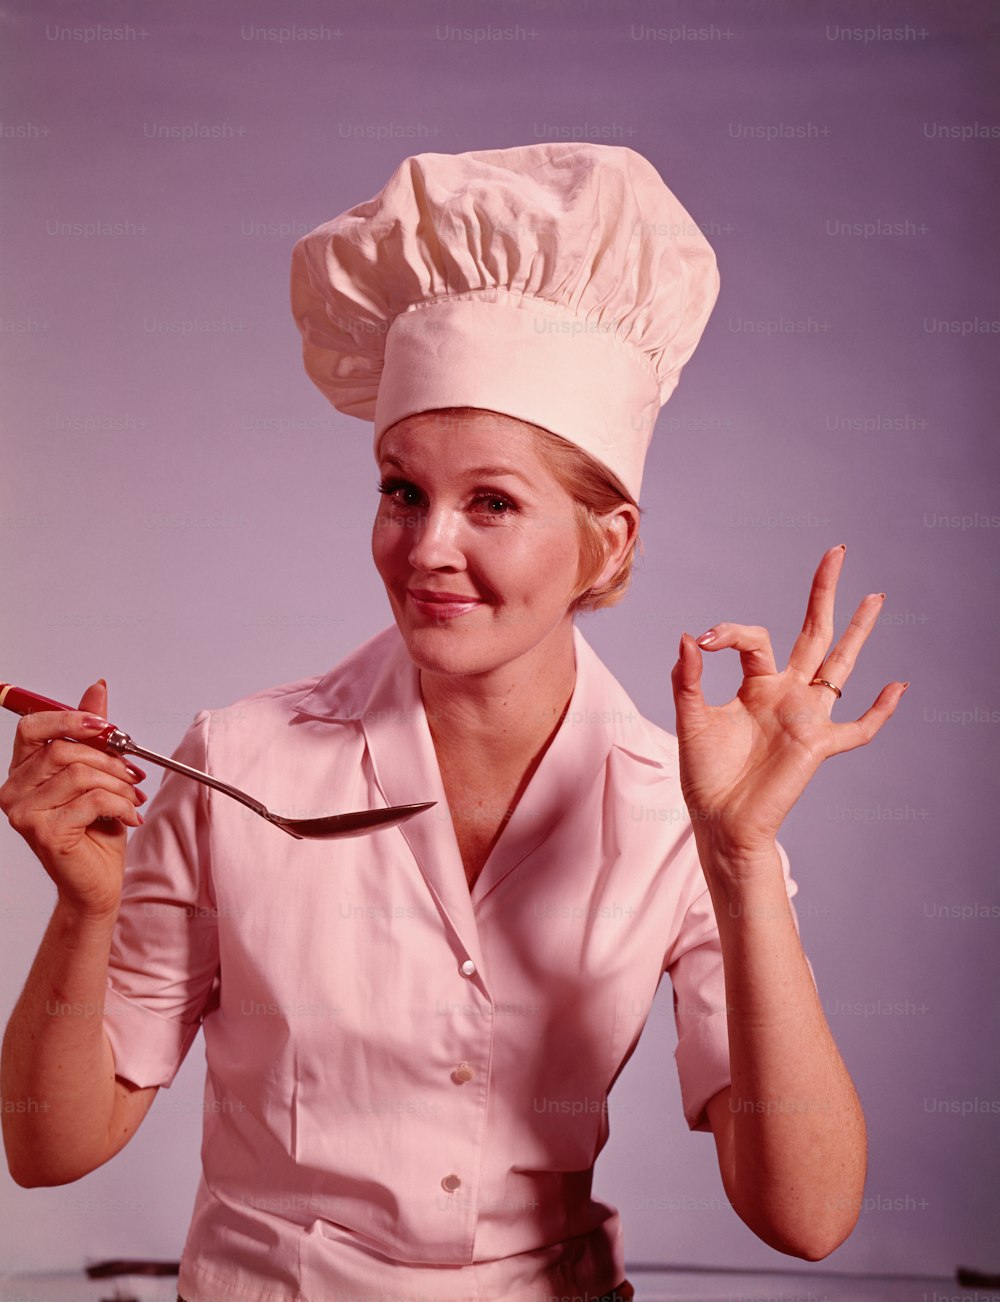 UNITED STATES - CIRCA 1960s:  Female chef smiling and gesturing 'ok' sign.